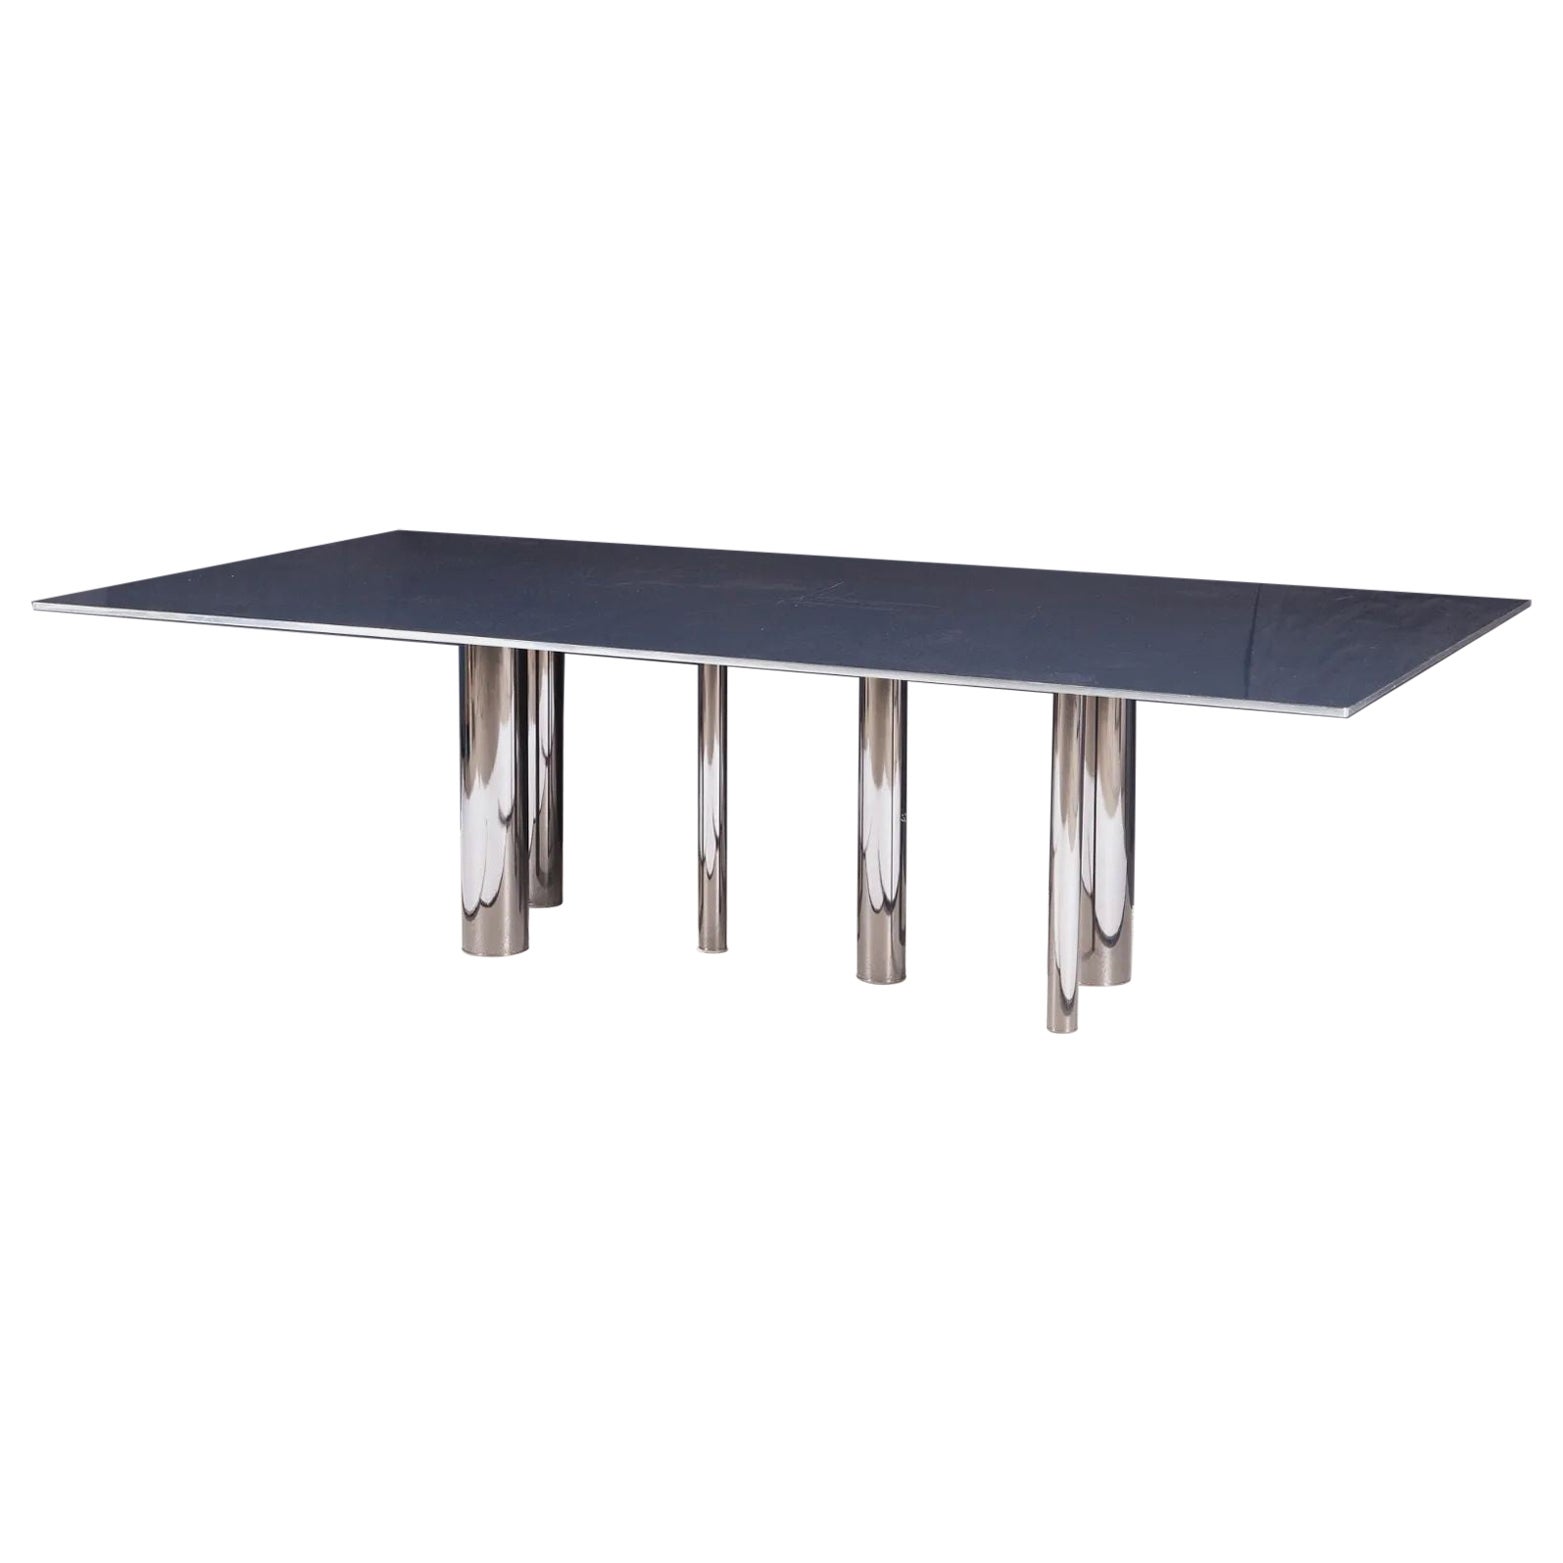 Martin Szekely, Contemporary, Limited Edition Dining Table, Steel, France, 2004 For Sale